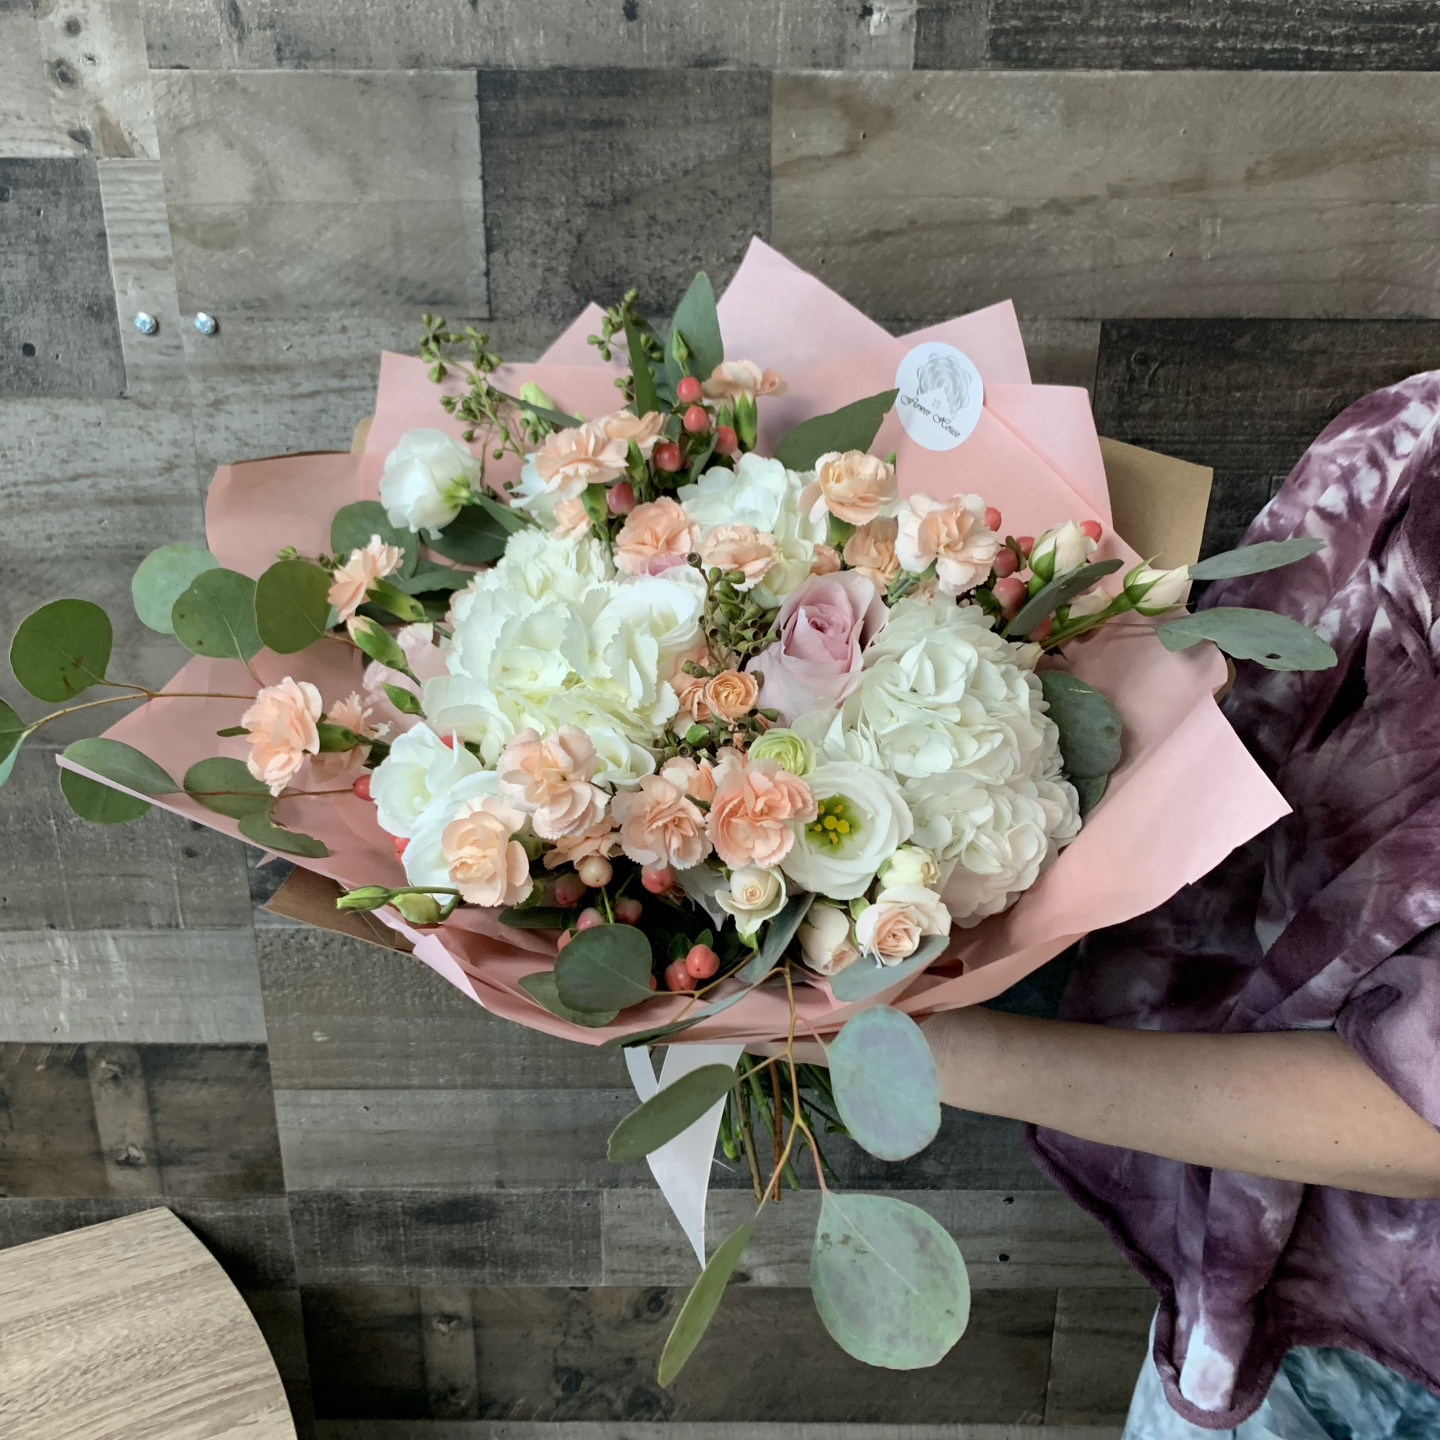 Kaia Hand-Tied Bouquet